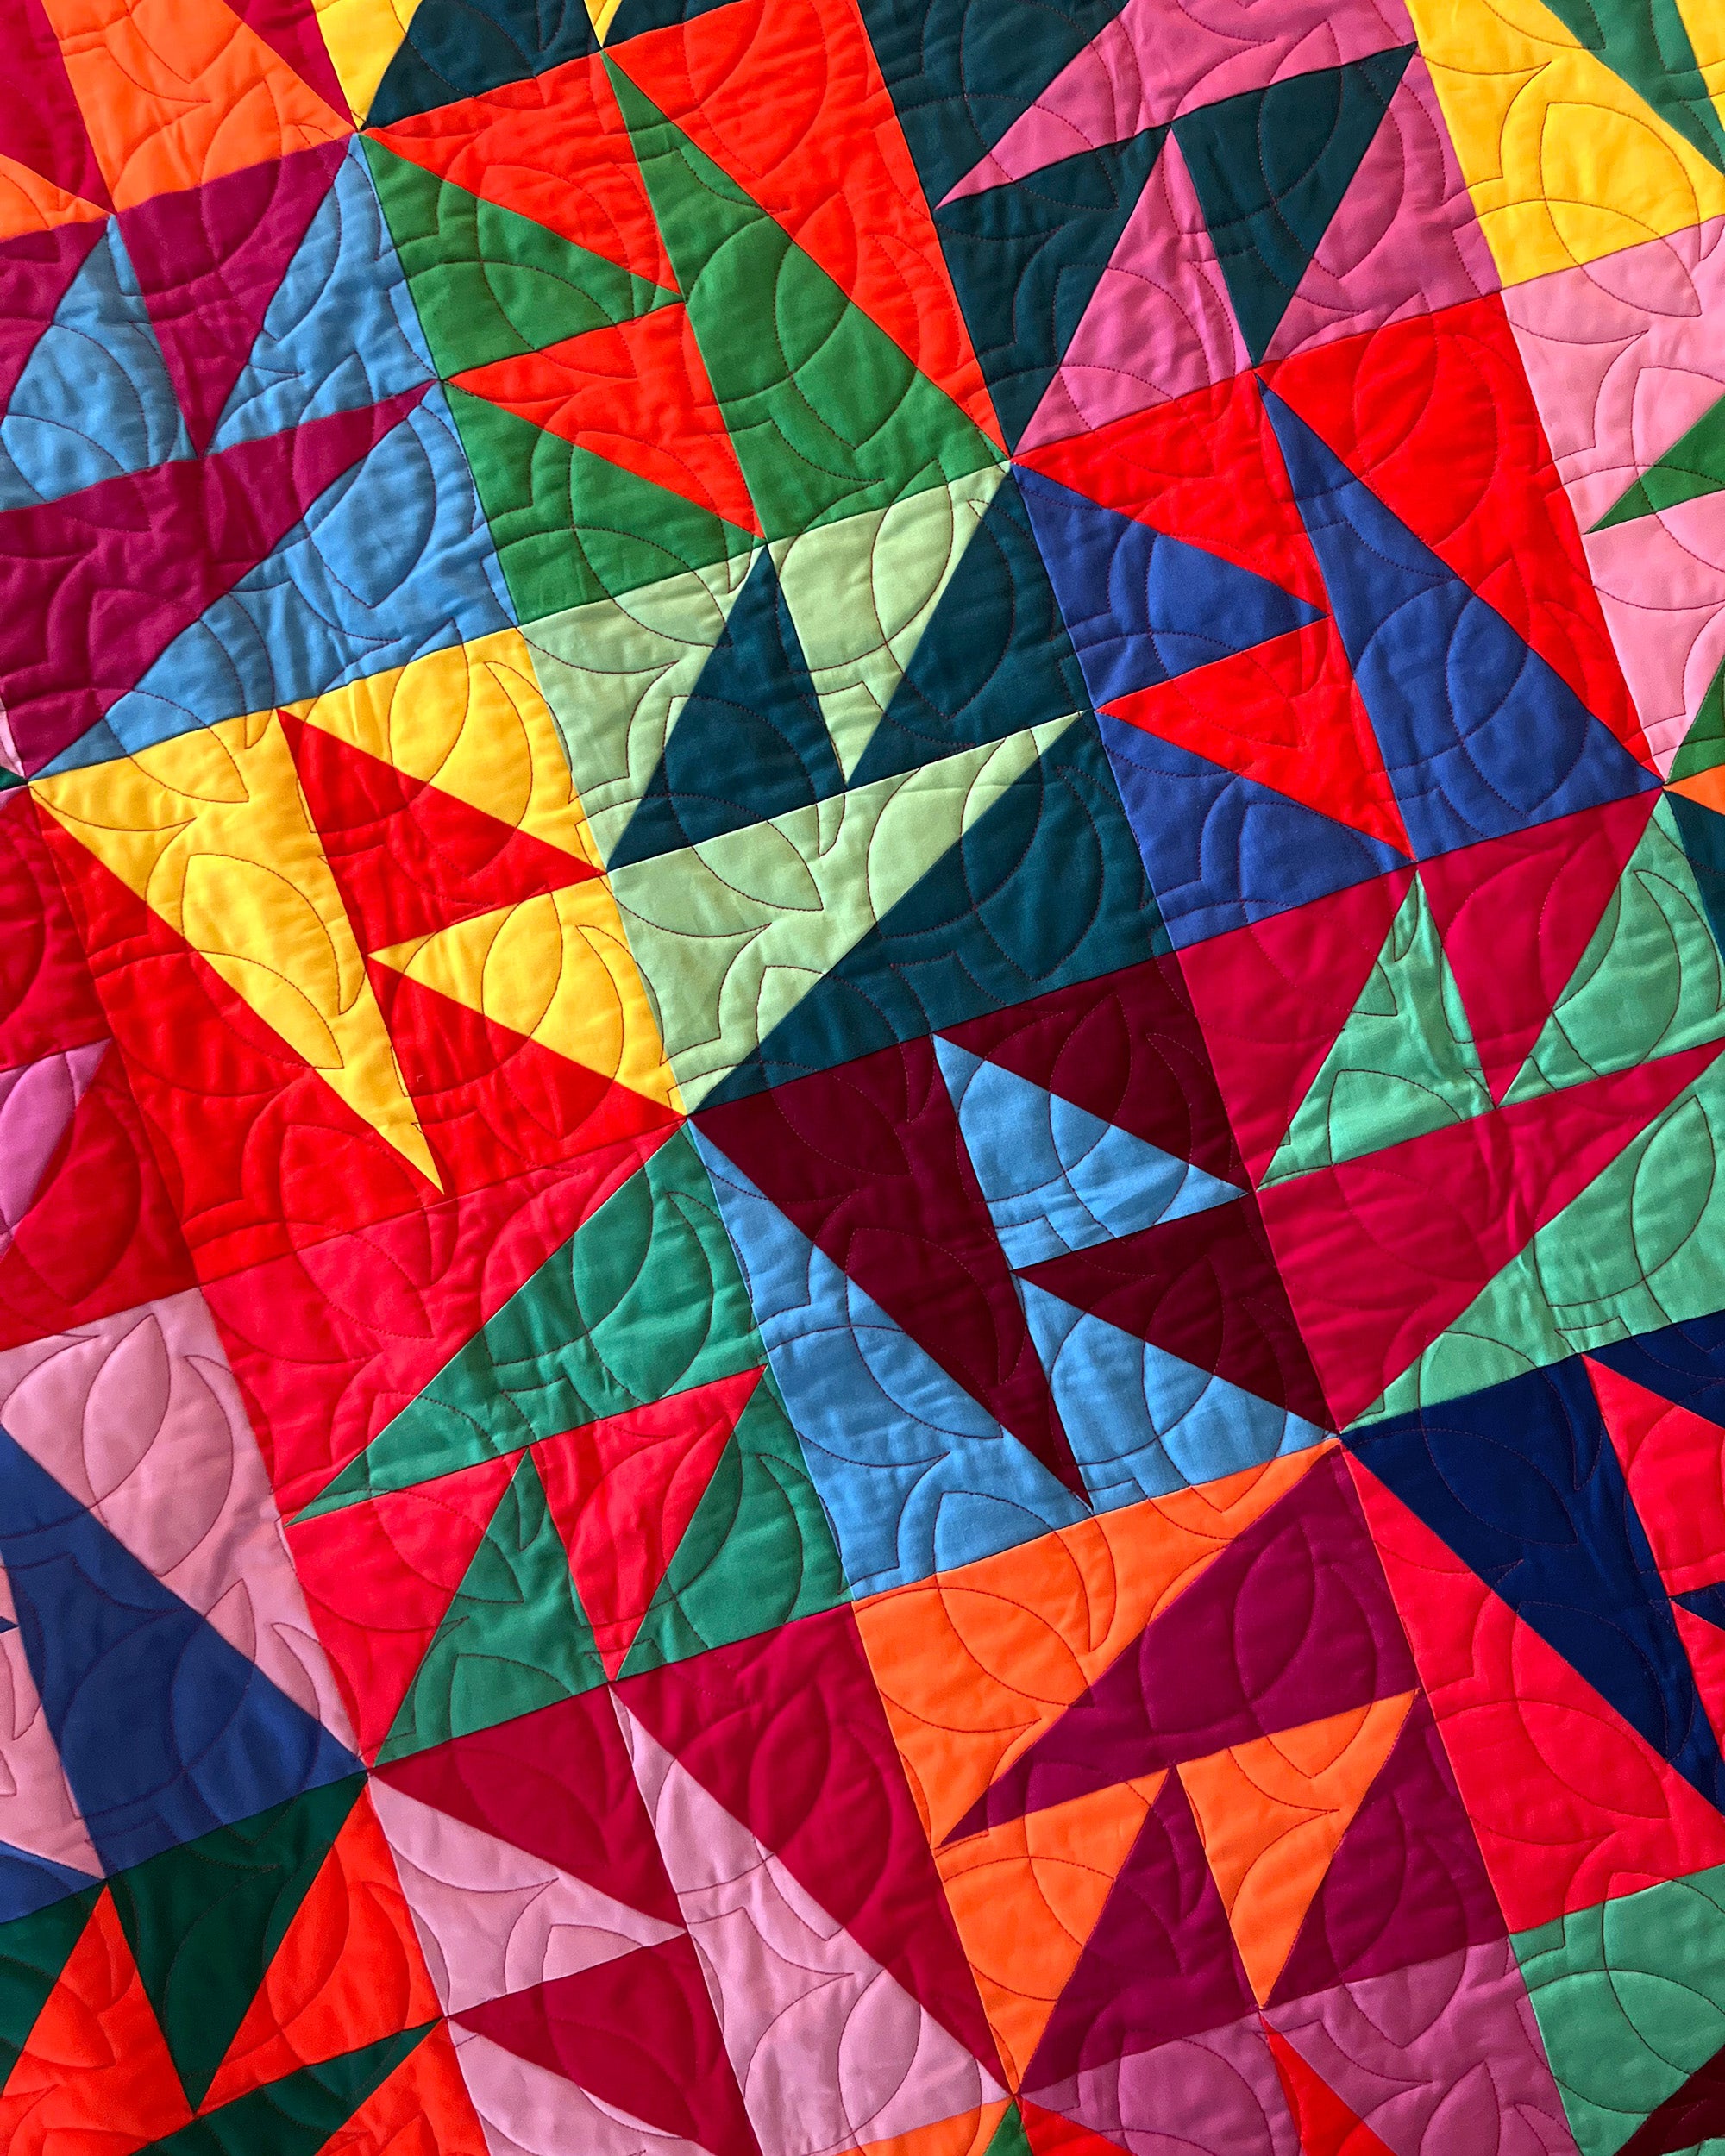 Gettin' Tipsy Quilt close-up